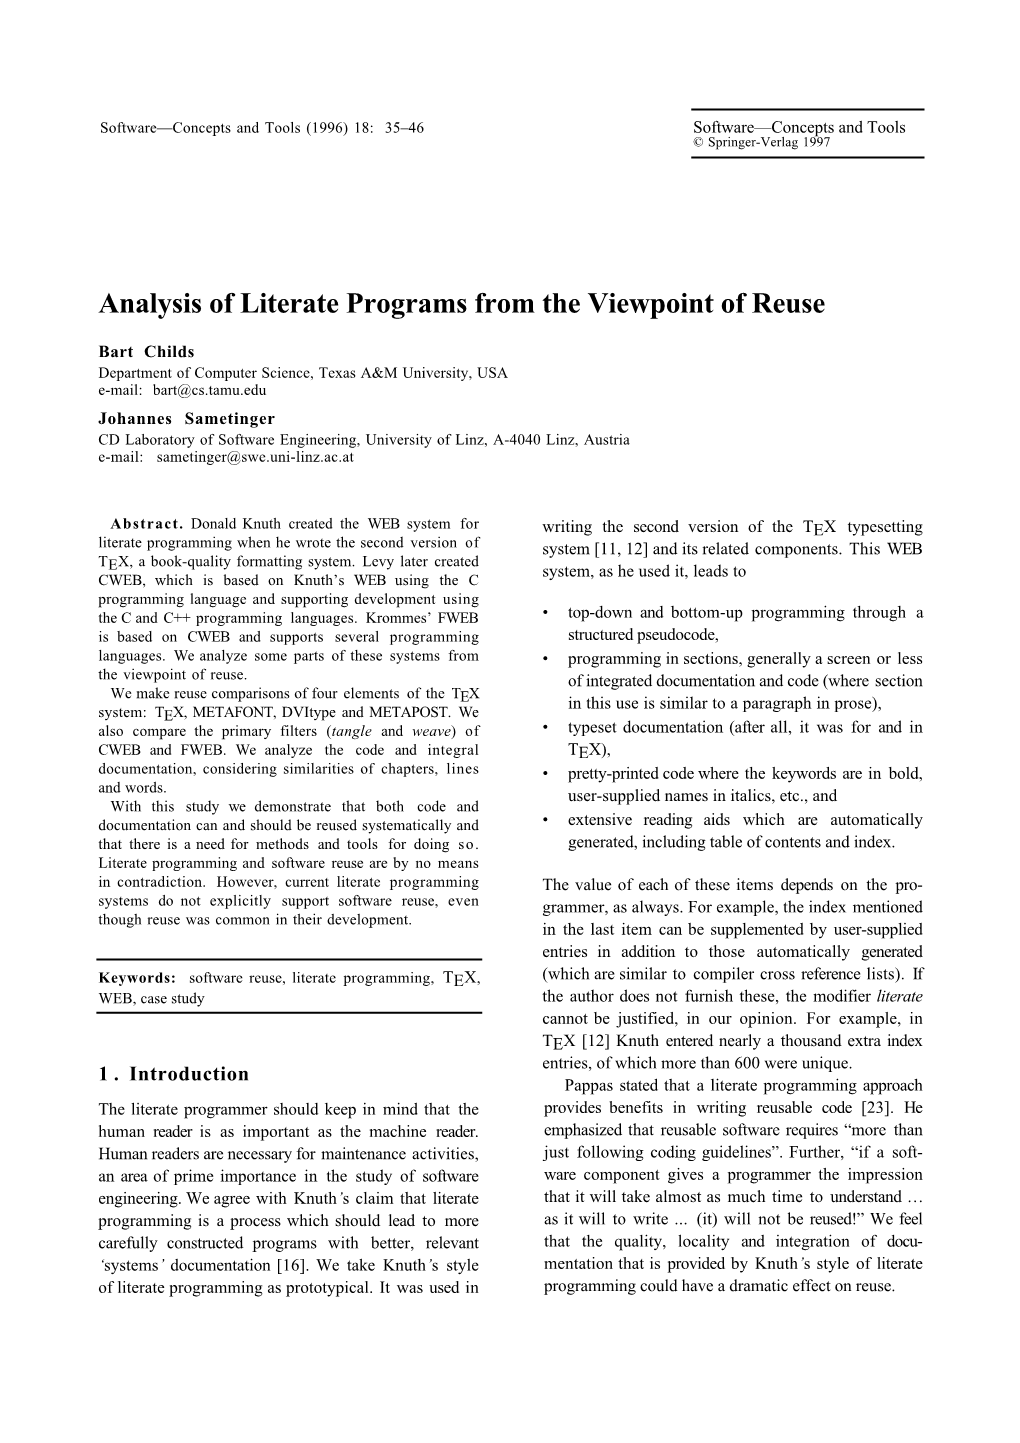 Analysis of Literate Programs from the Viewpoint of Reuse